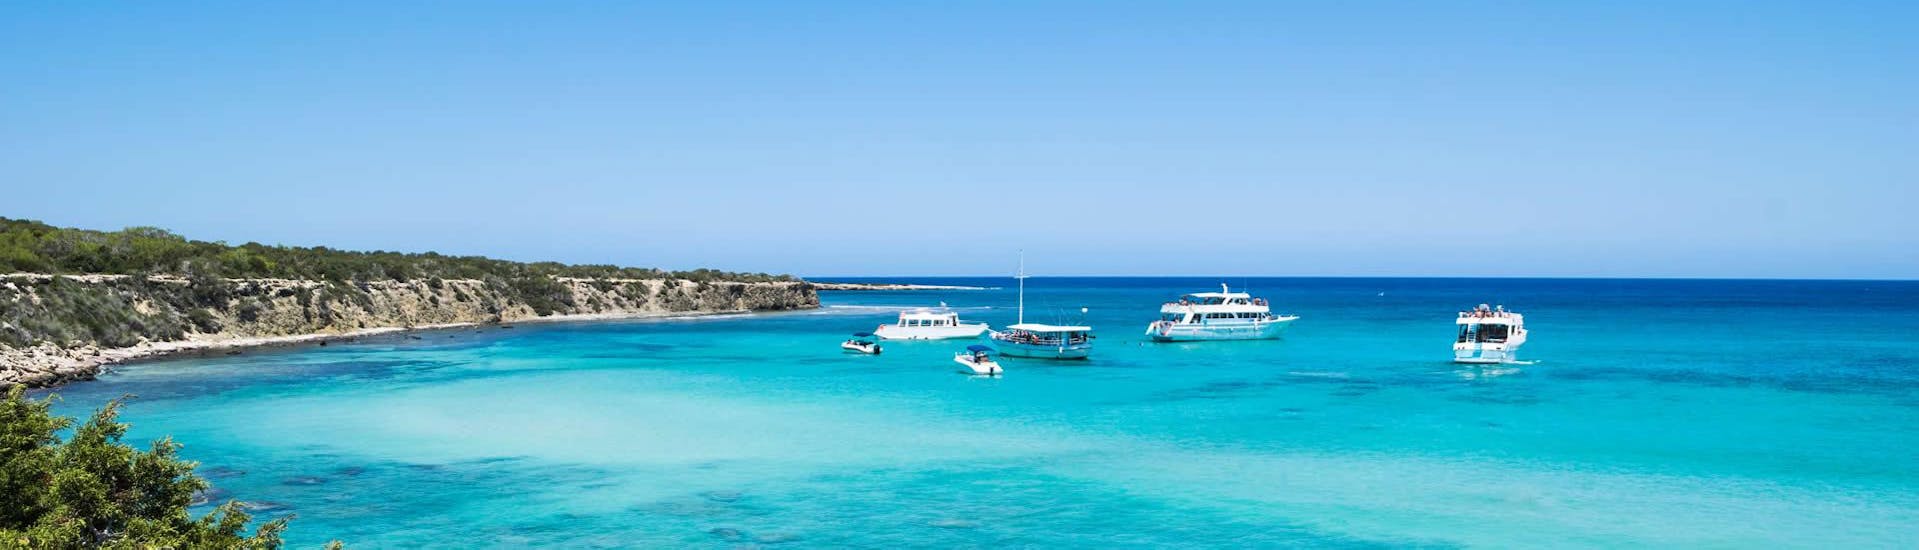 Several boats at anchor in the Blue Lagoon of Cyprus in Akamas.